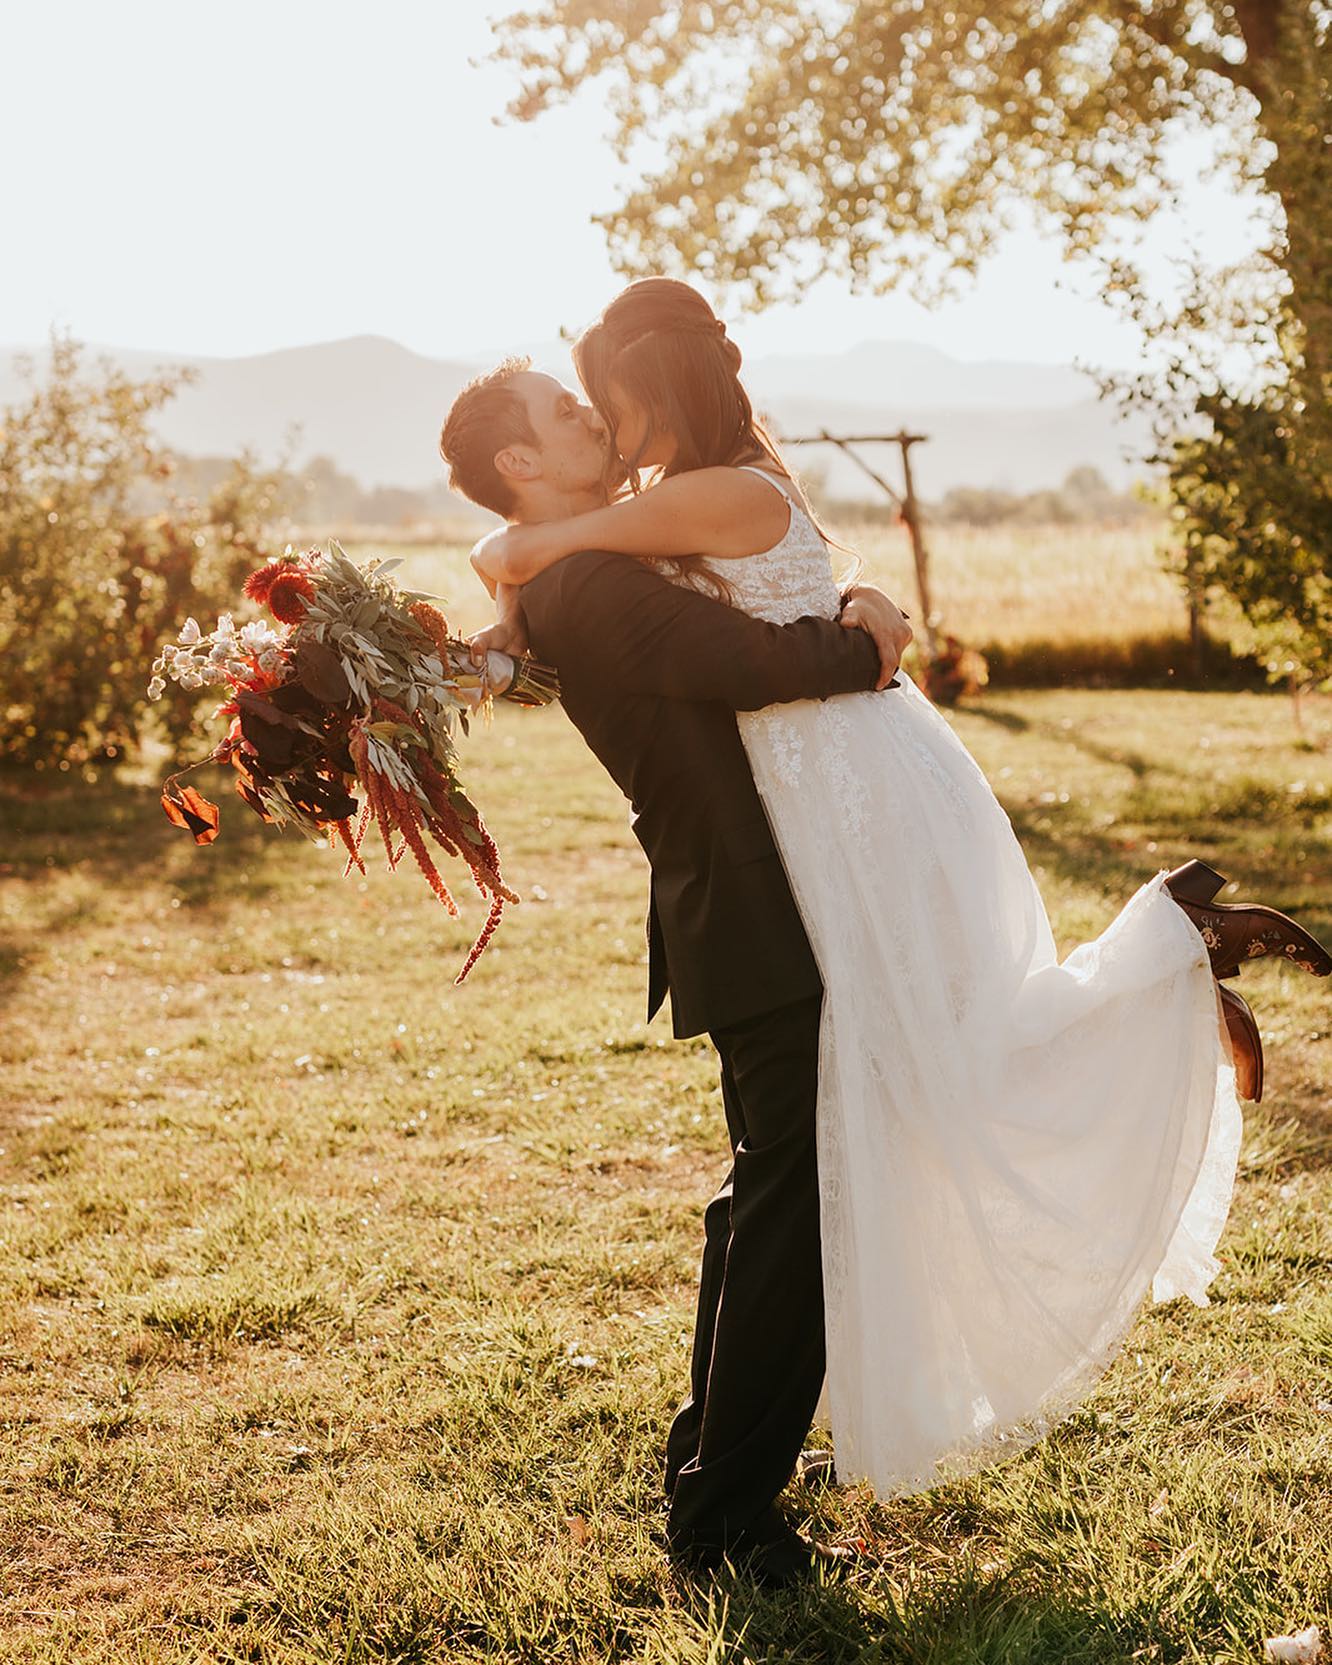 Helios Landscape Designer, Kristen whitehead and her late husband kissing on their wedding day.